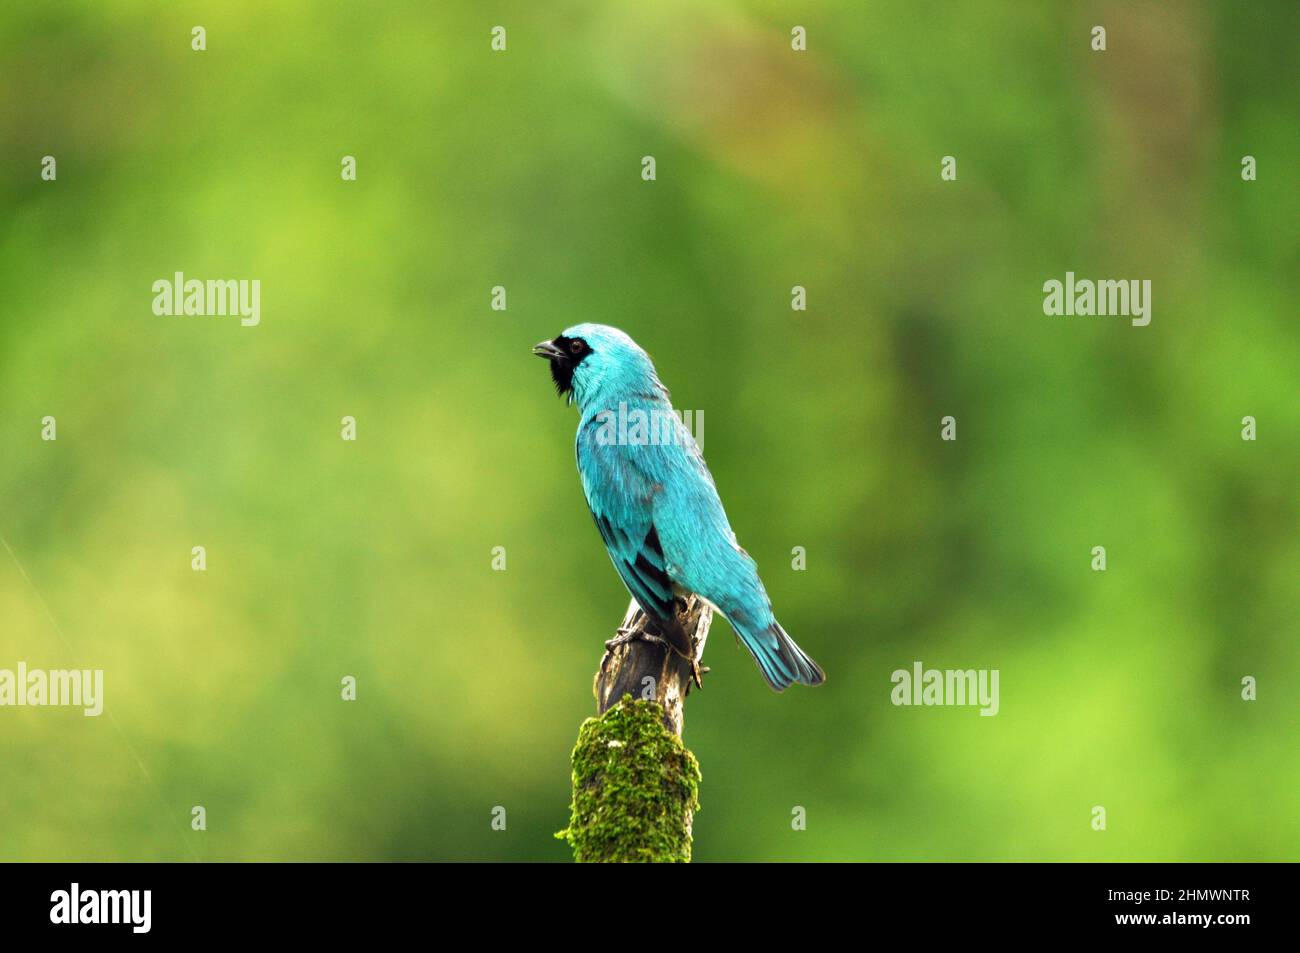 Swallow Tanager (Tersina viridis) perched on a branch side and rear view, taken at Iguazu falls, Argentina Stock Photo